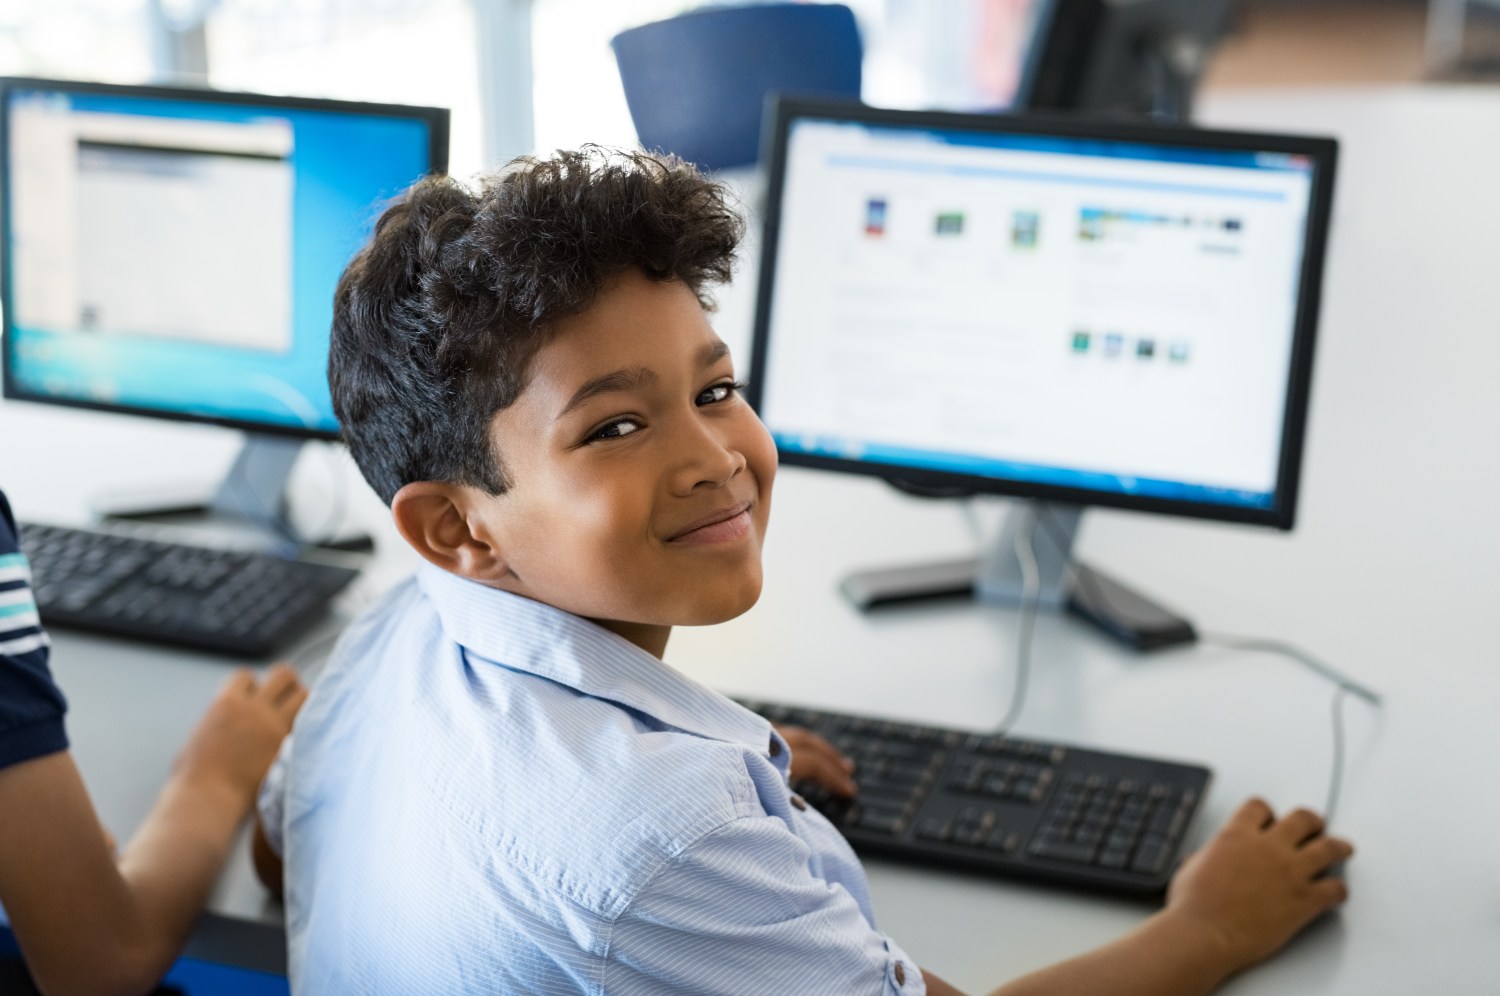 Child at a computer